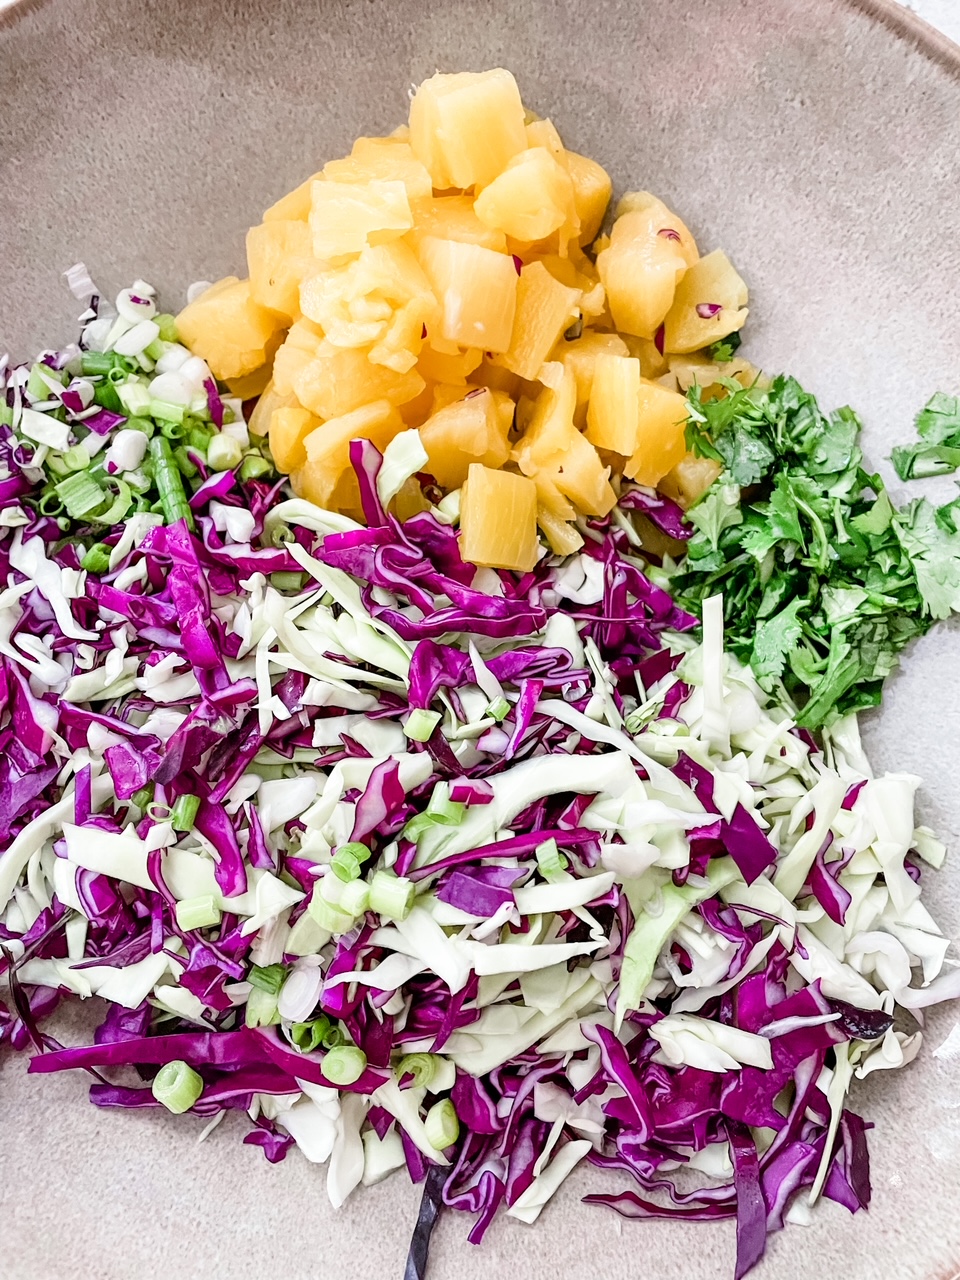 The components of the Spicy Pineapple Coleslaw before mixing together